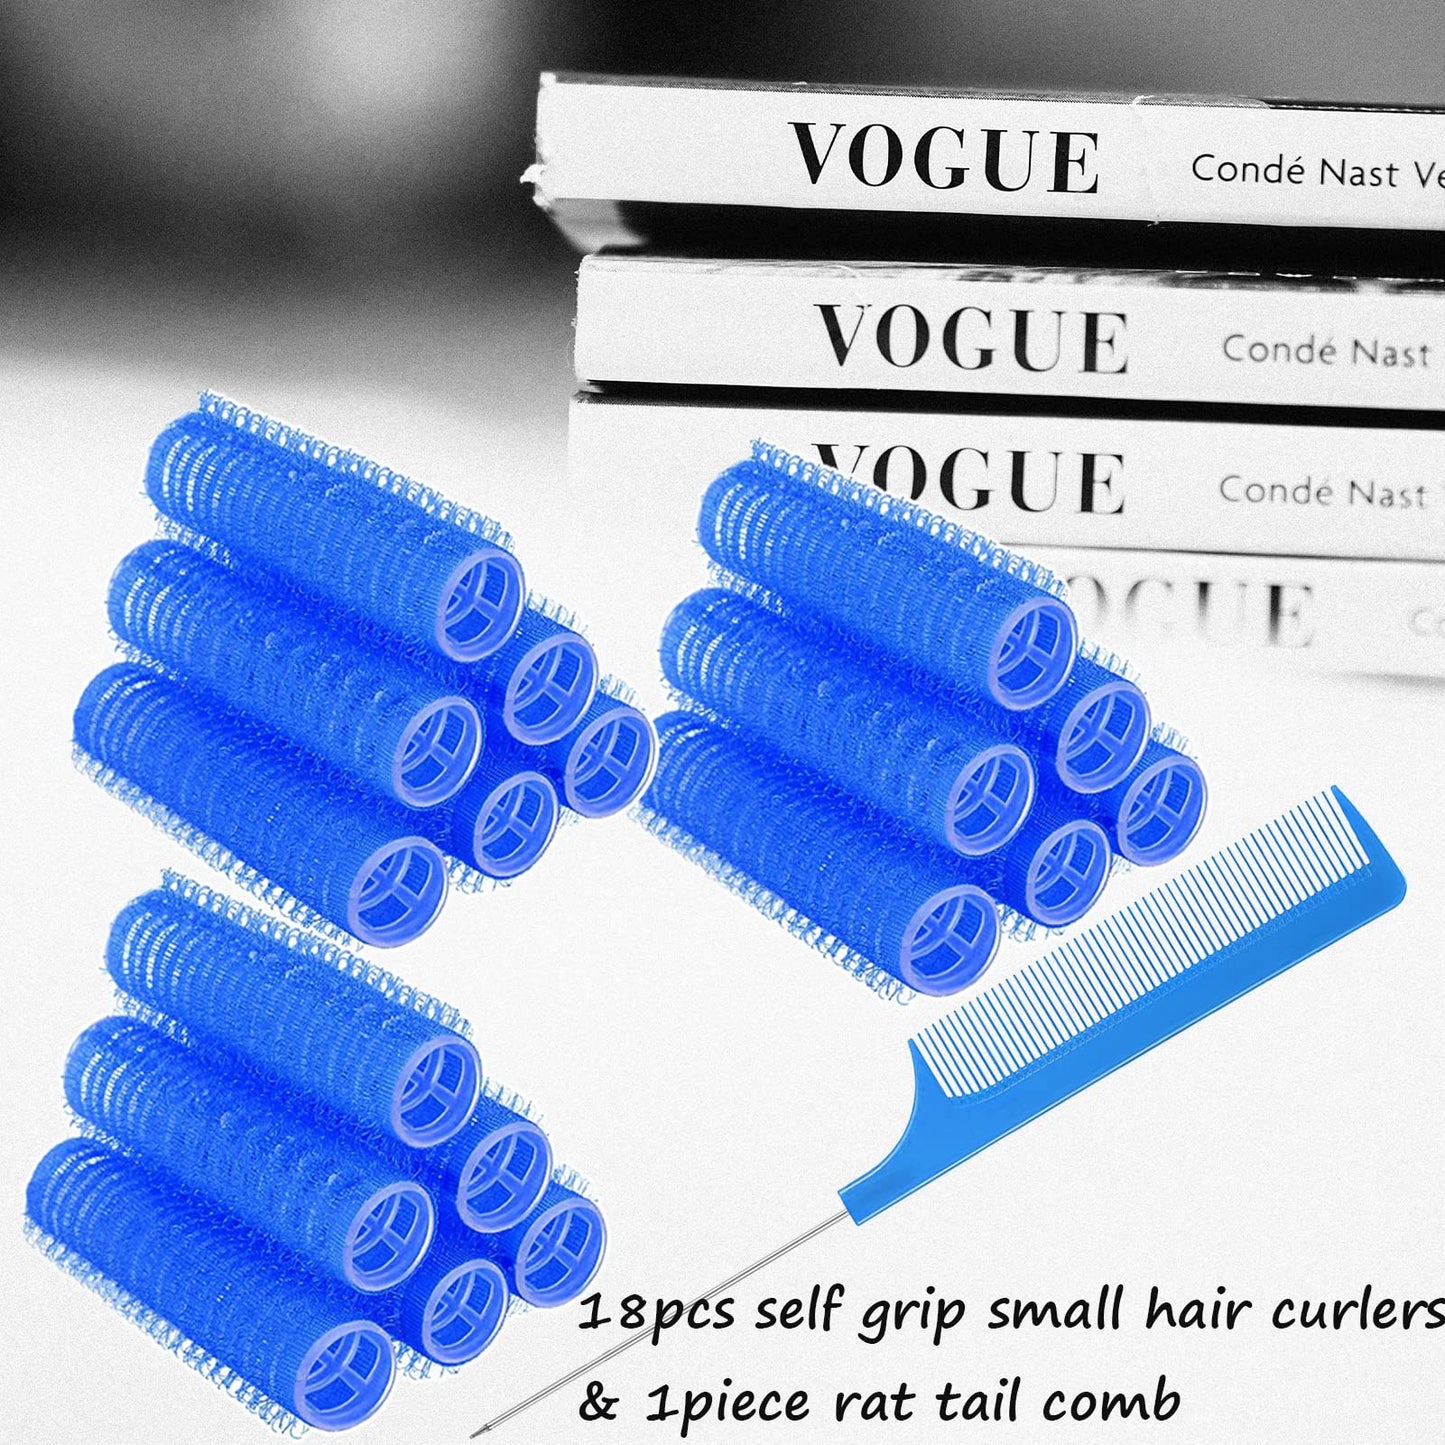 MOODKEY 18PCS Self Grip Small Hair Curlers Heatless Roller Hair Curlers Pro Salon Hairdressing Curler DIY Curly Hairstyle Hair Rollers Tools Rat Tail Comb for Women Medium Short Hair(0.8 x 2.4 Inch)